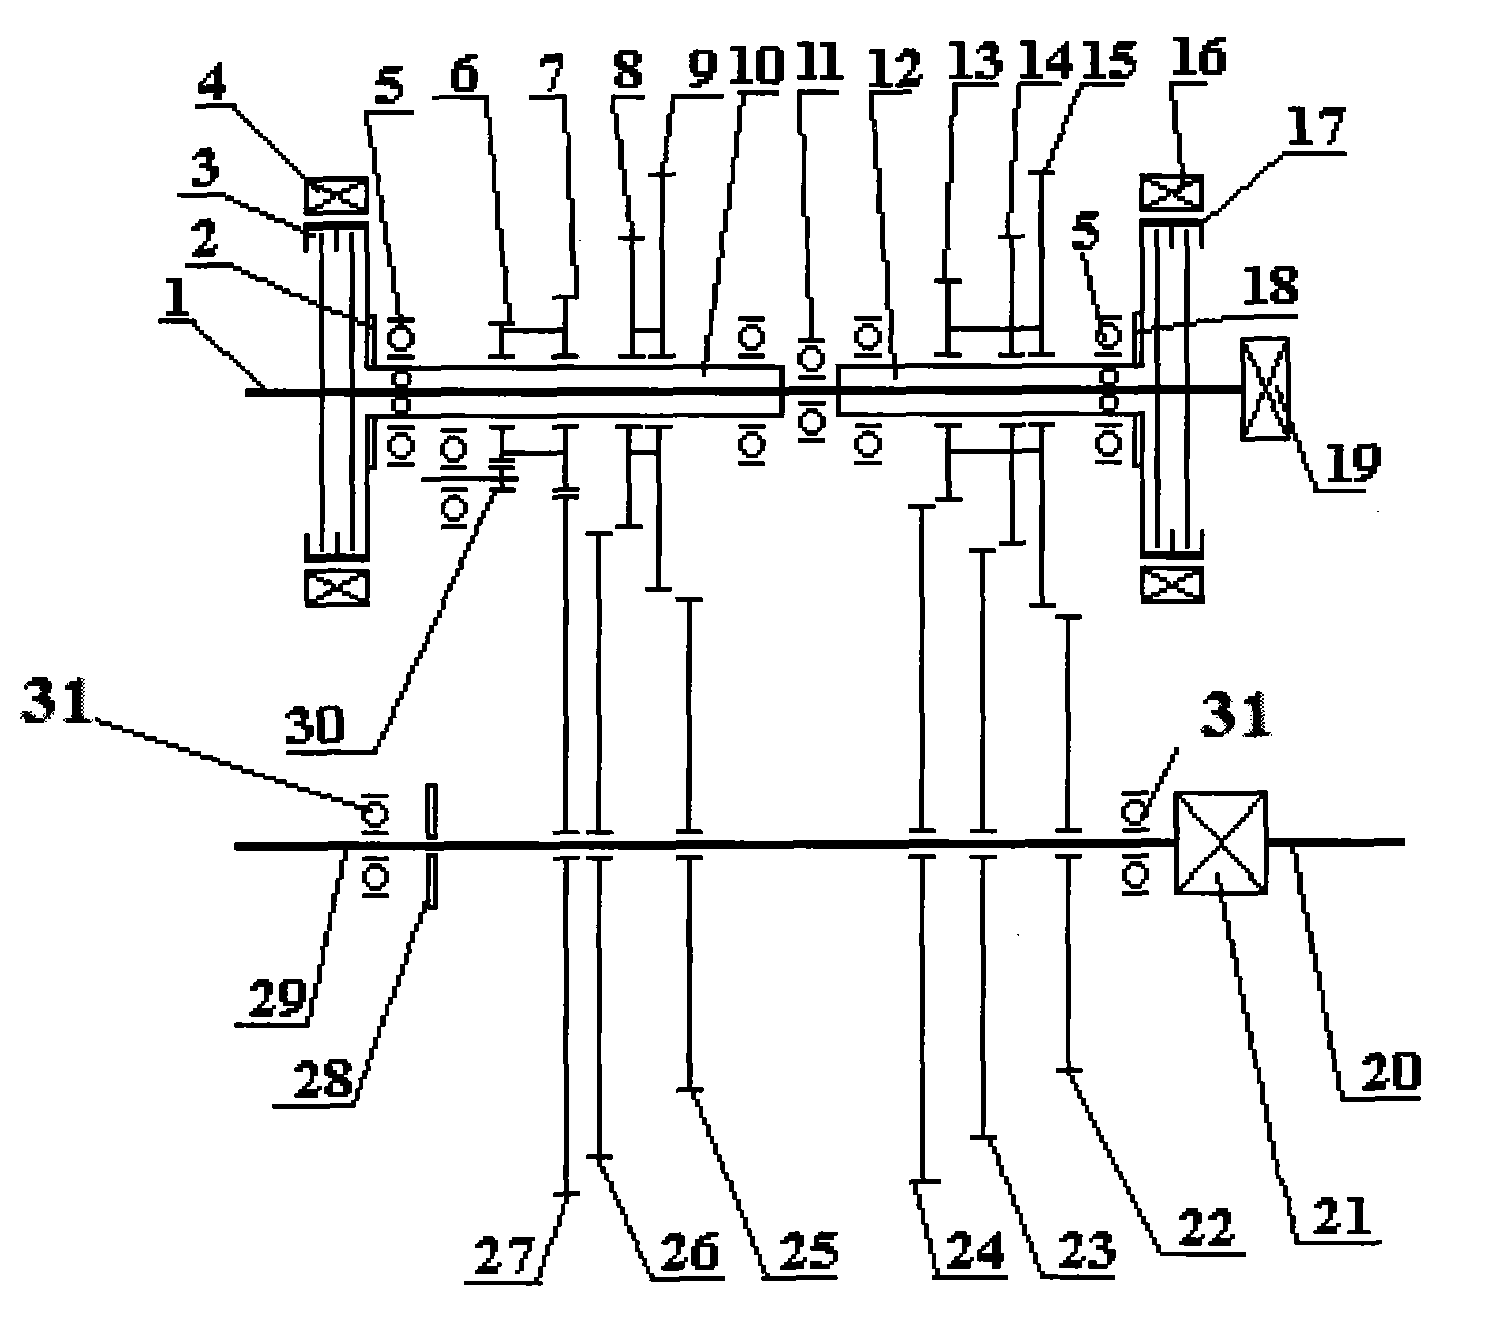 Double-clutch automatic speed changer